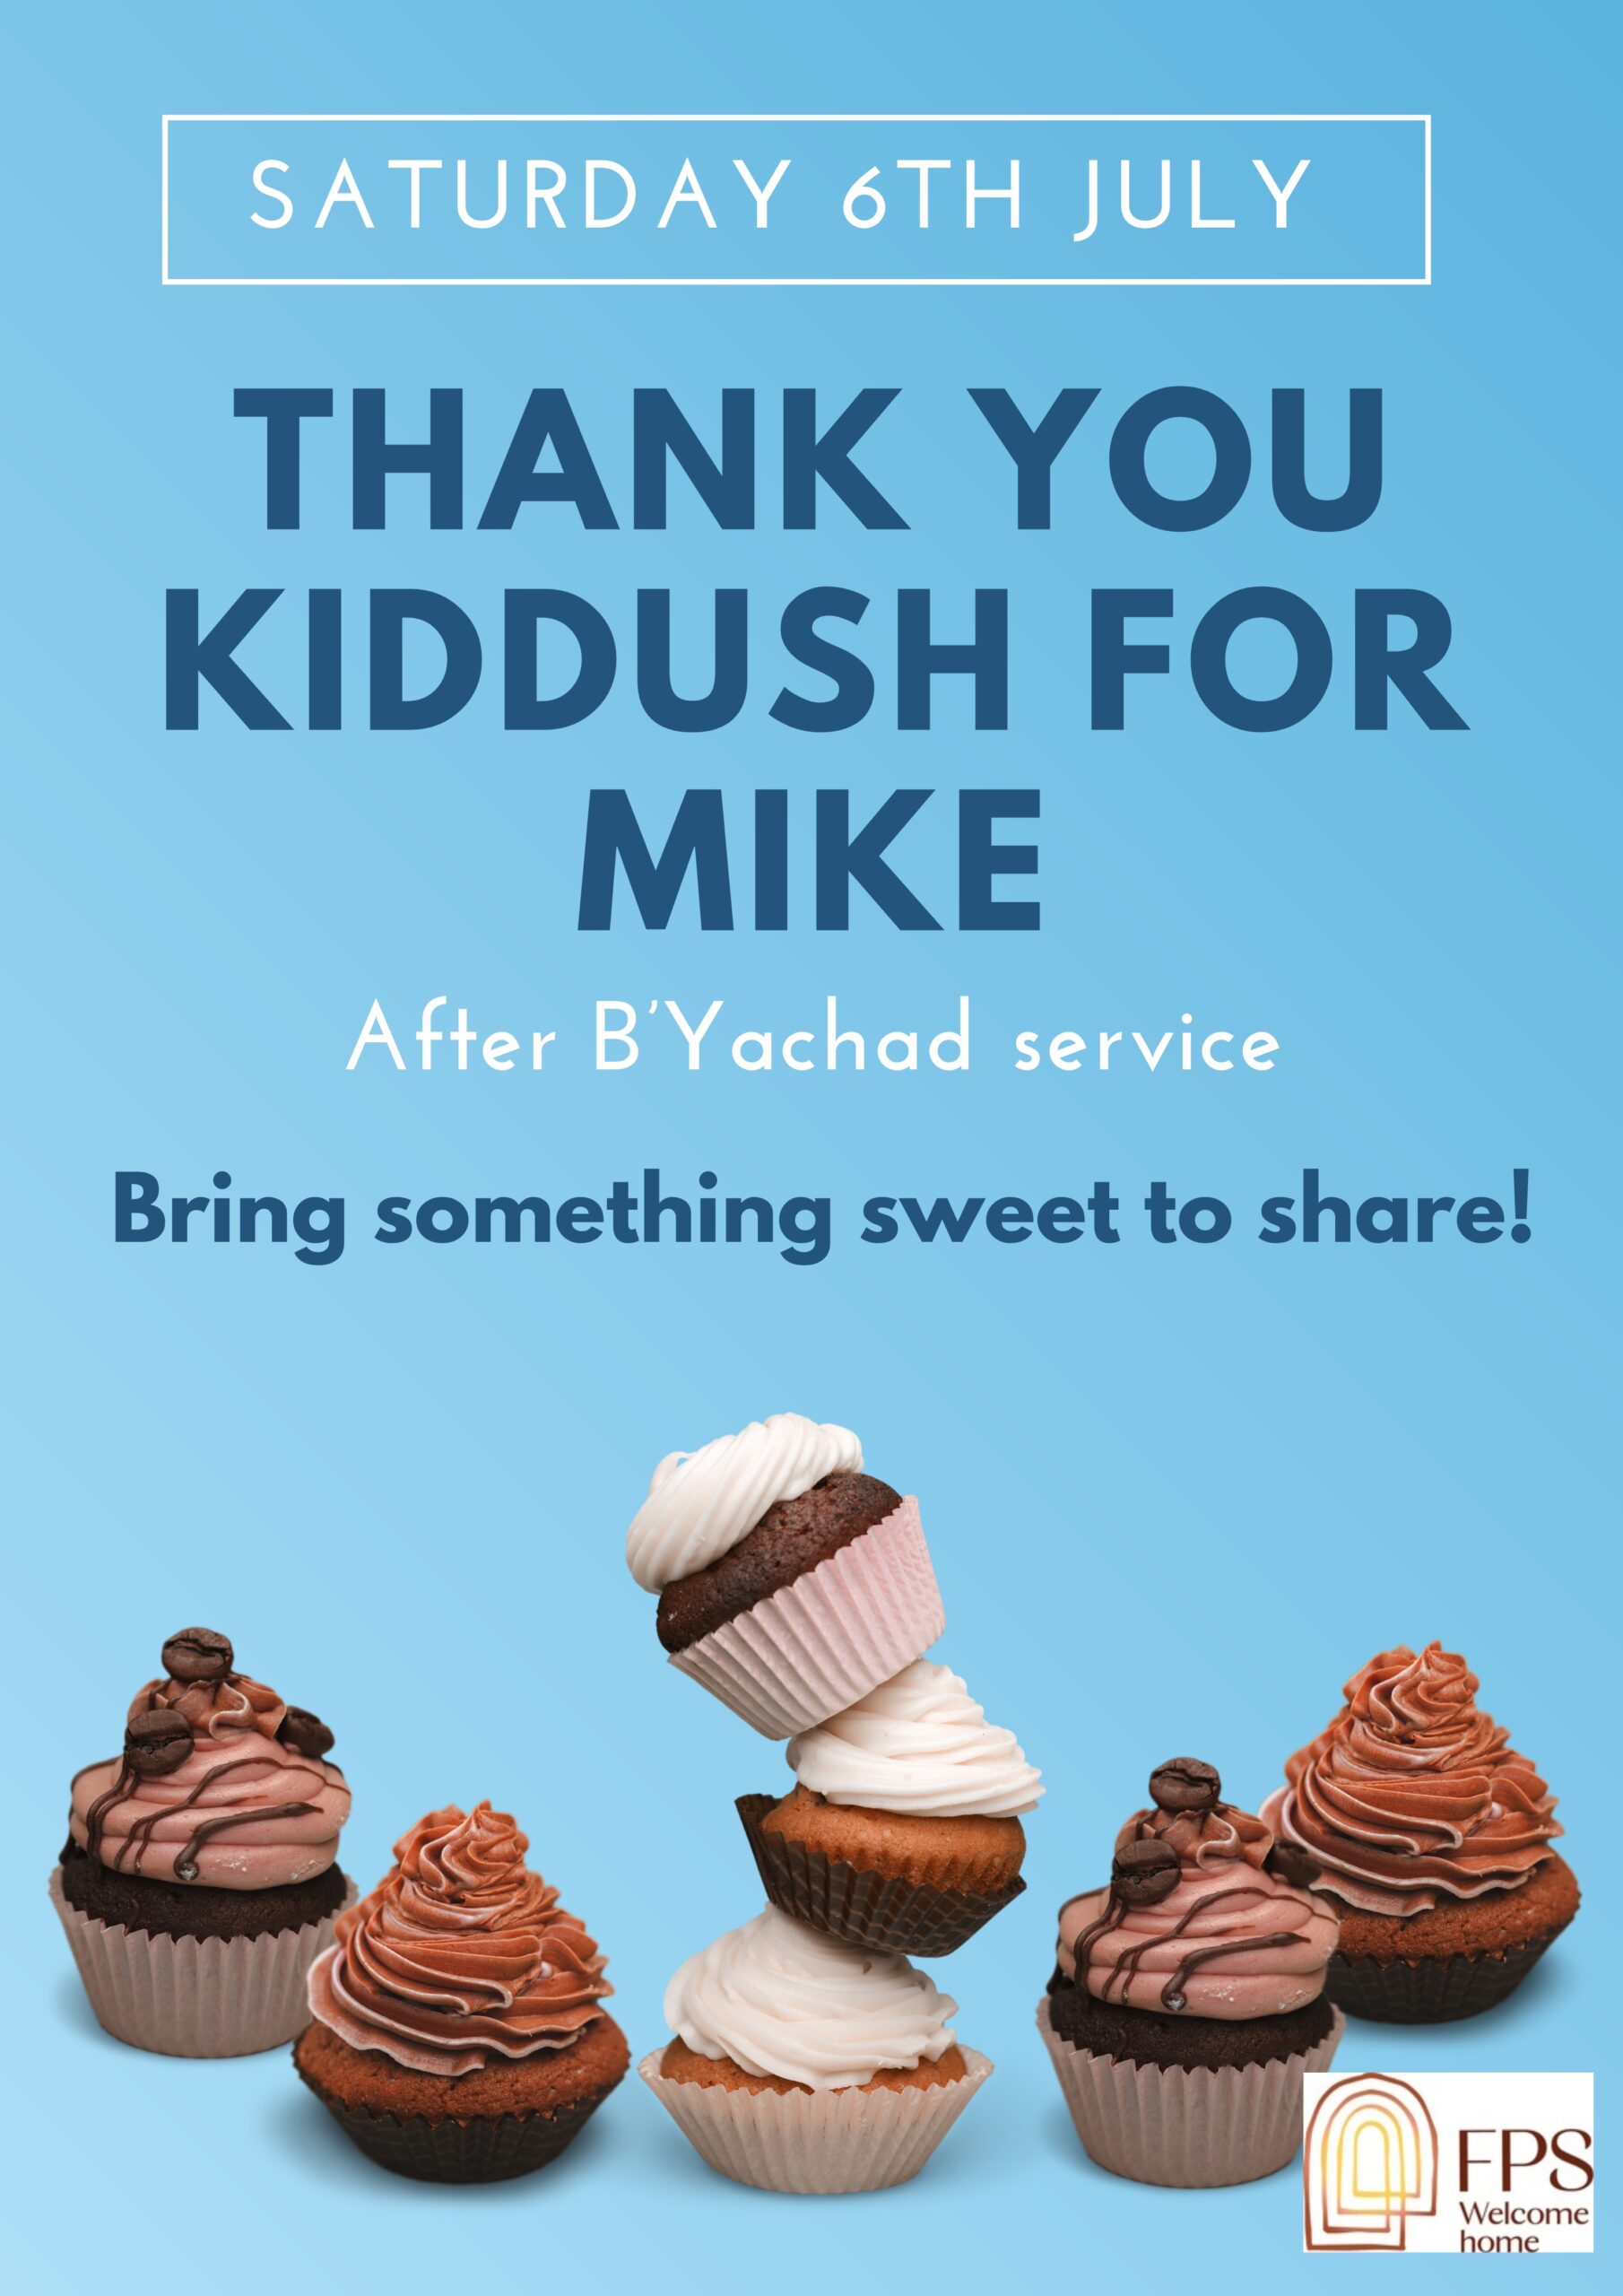 Thank You Kiddush for Mike